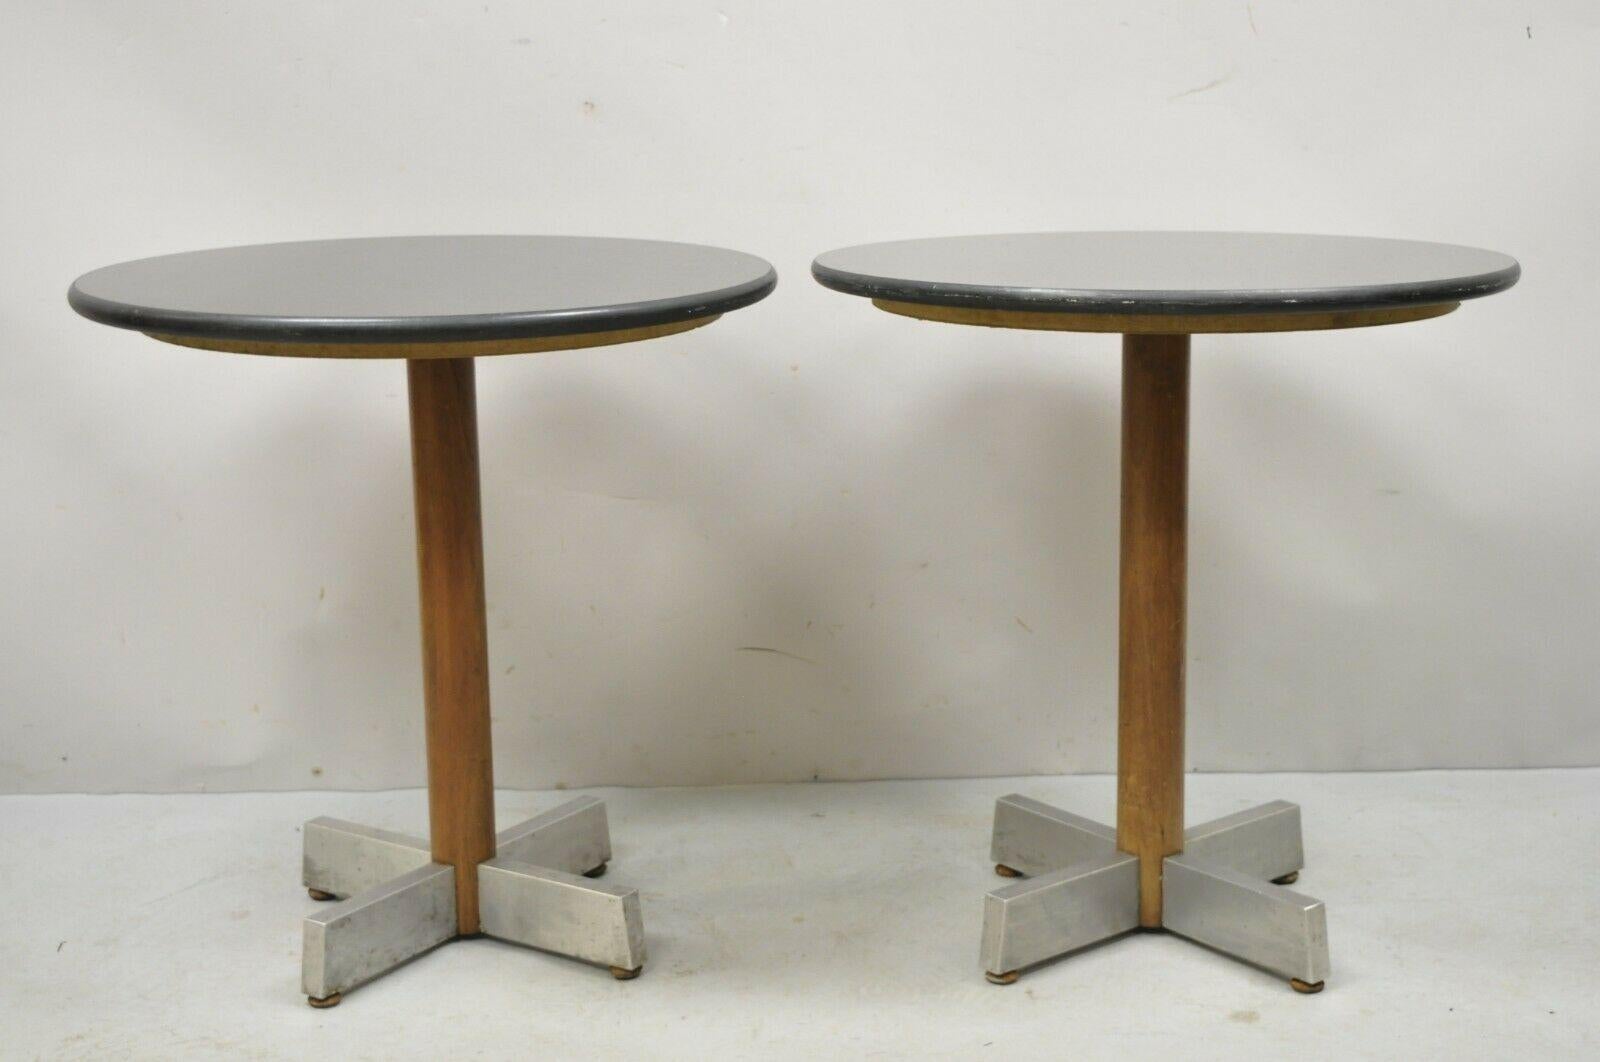 Mid Century Modern Round Granite Top Metal Star Base Side Tables - a Pair. Item features round granite stone tops, wooden pedestal shafts, brushed aluminum star form base, heavy construction, clean modernist lines, great style and form. Circa Late